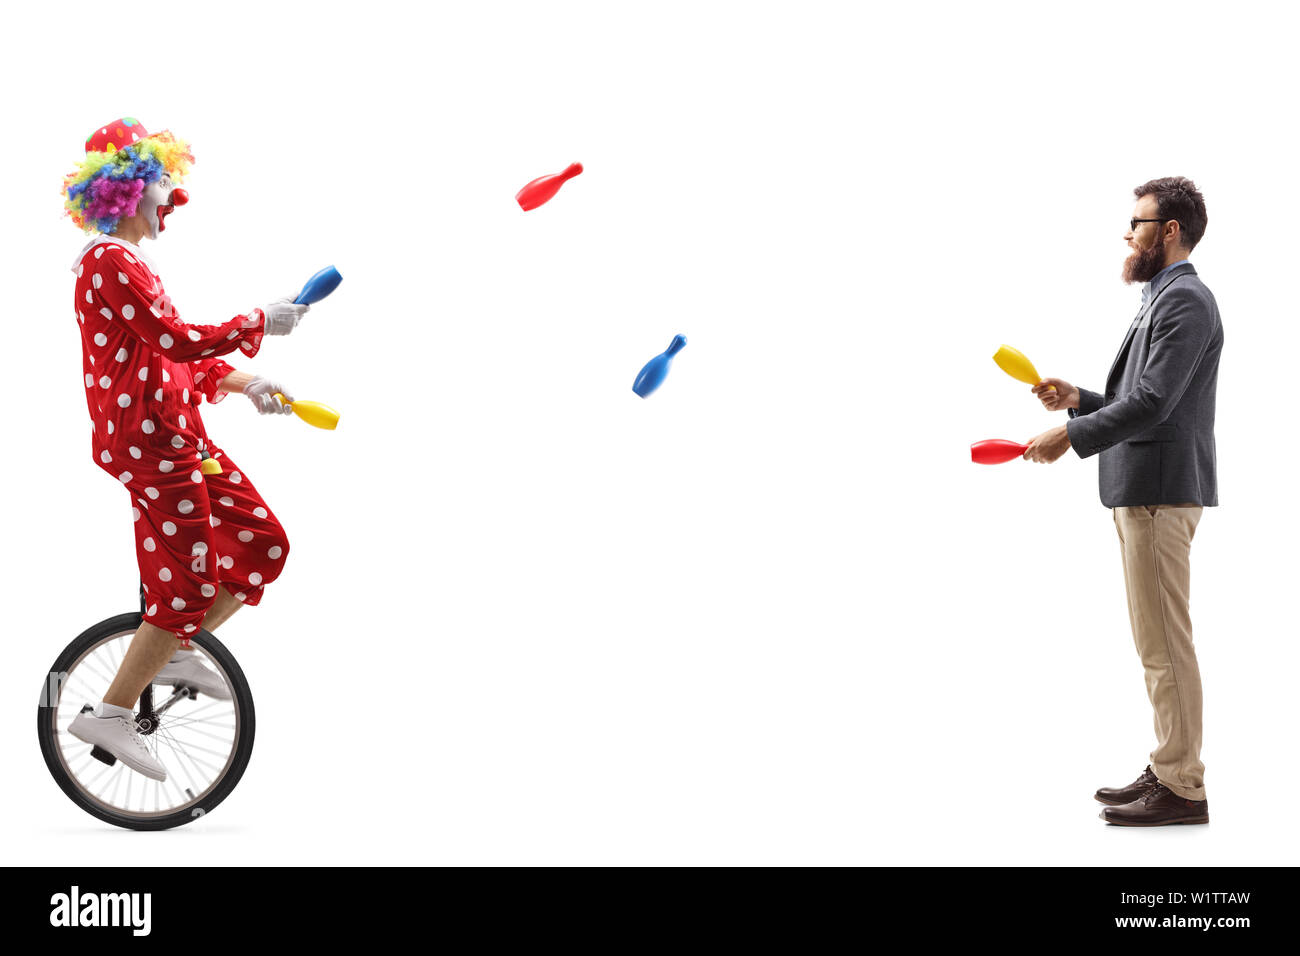 Full length profile shot of a clown on a unicycle juggling with a bearded man isolated on white background Stock Photo